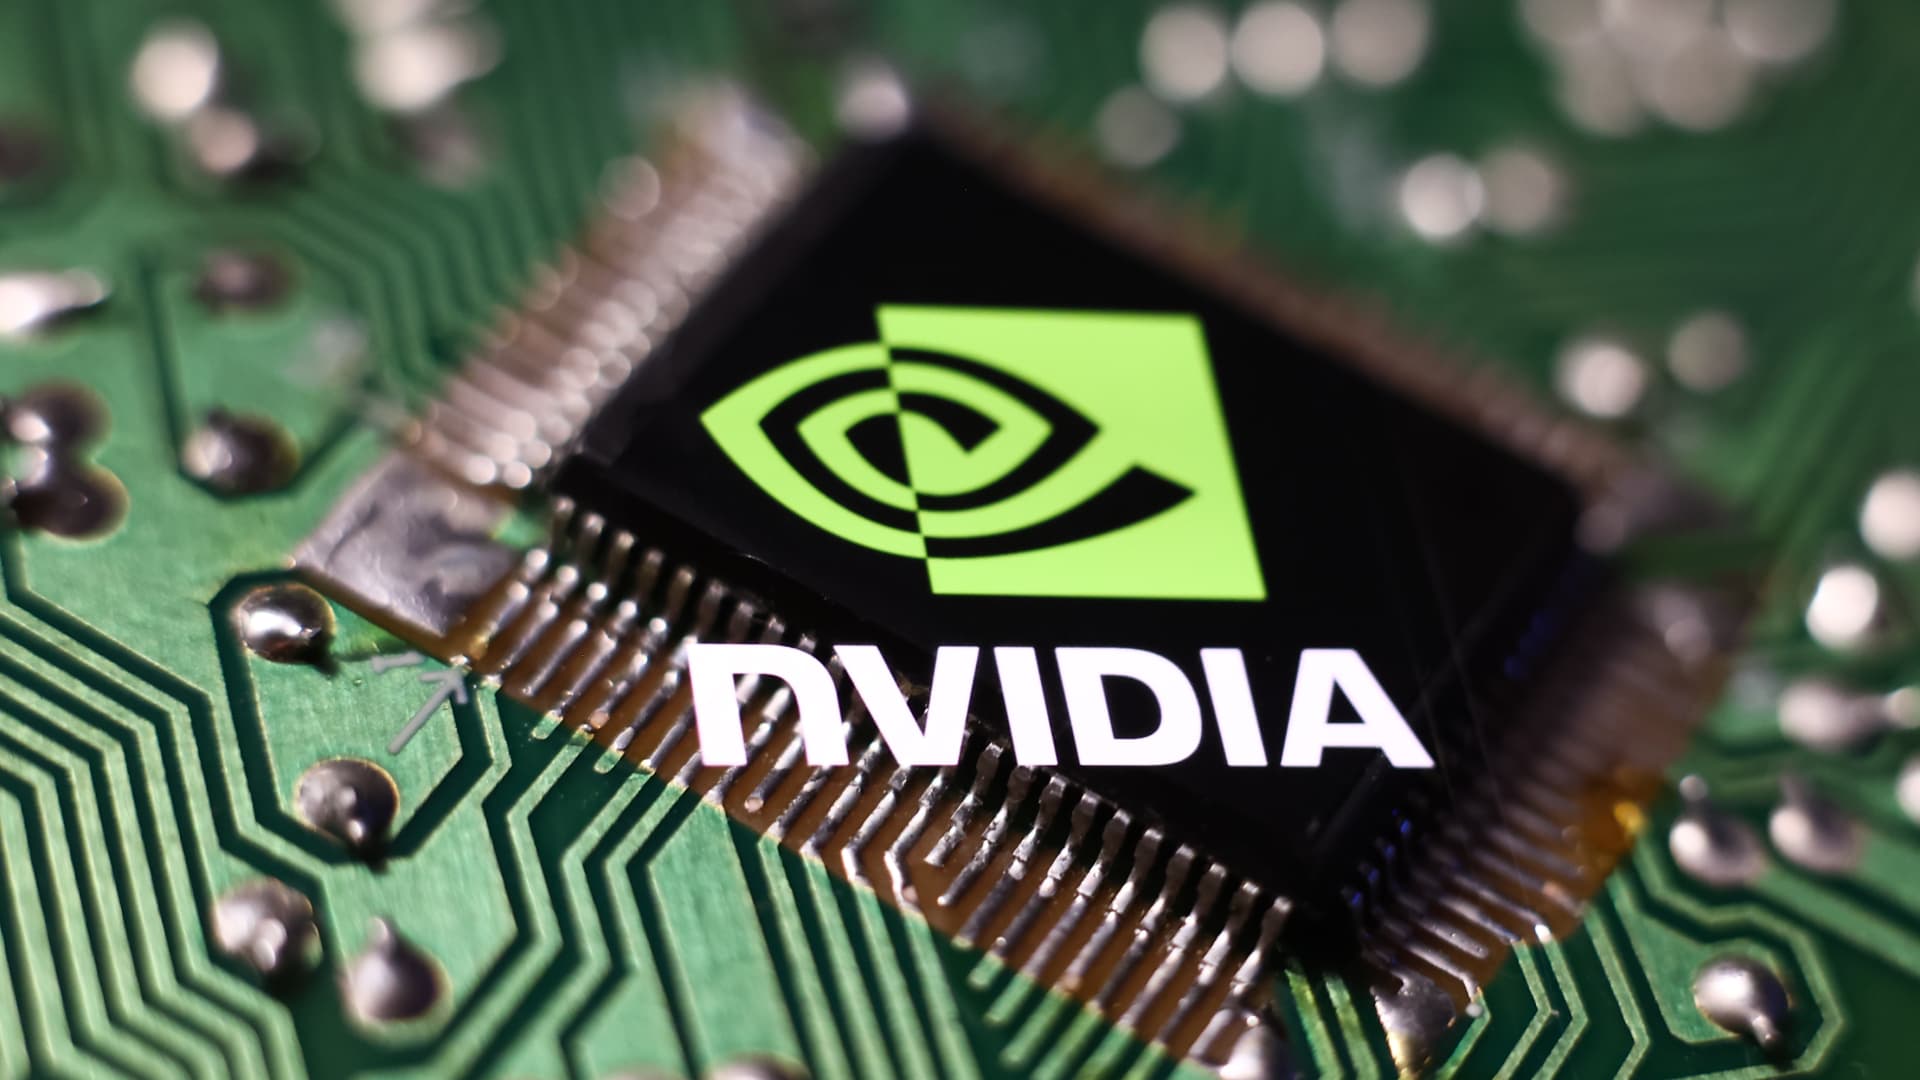 Missed Nvidia rally? These stocks are buying NVDA’s AI chips